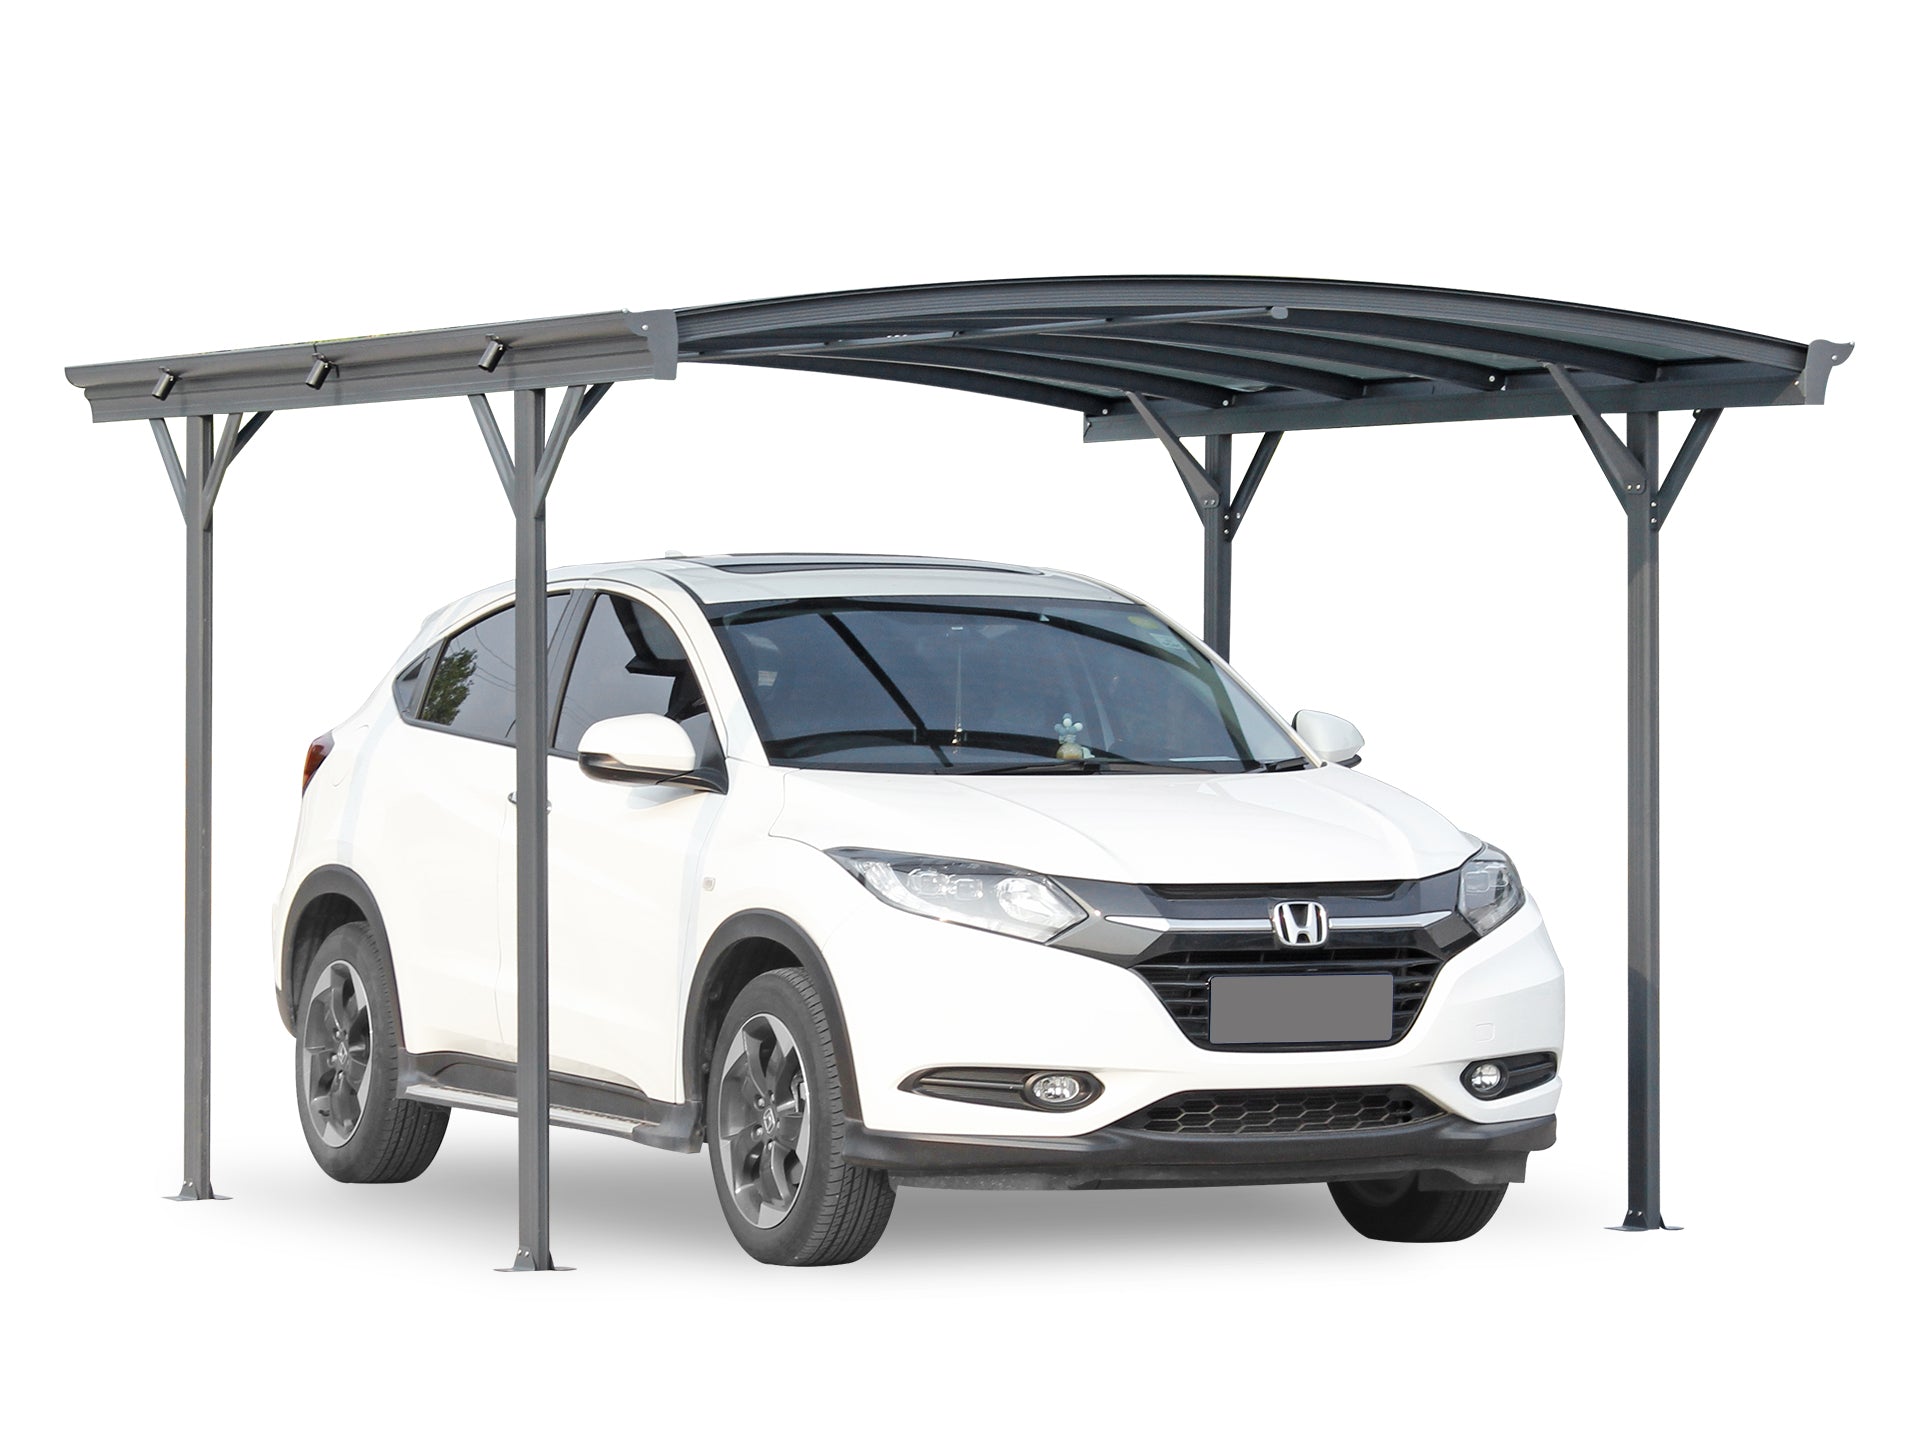 Patio Carport Canopy Curved Roof 3.6M x 3M